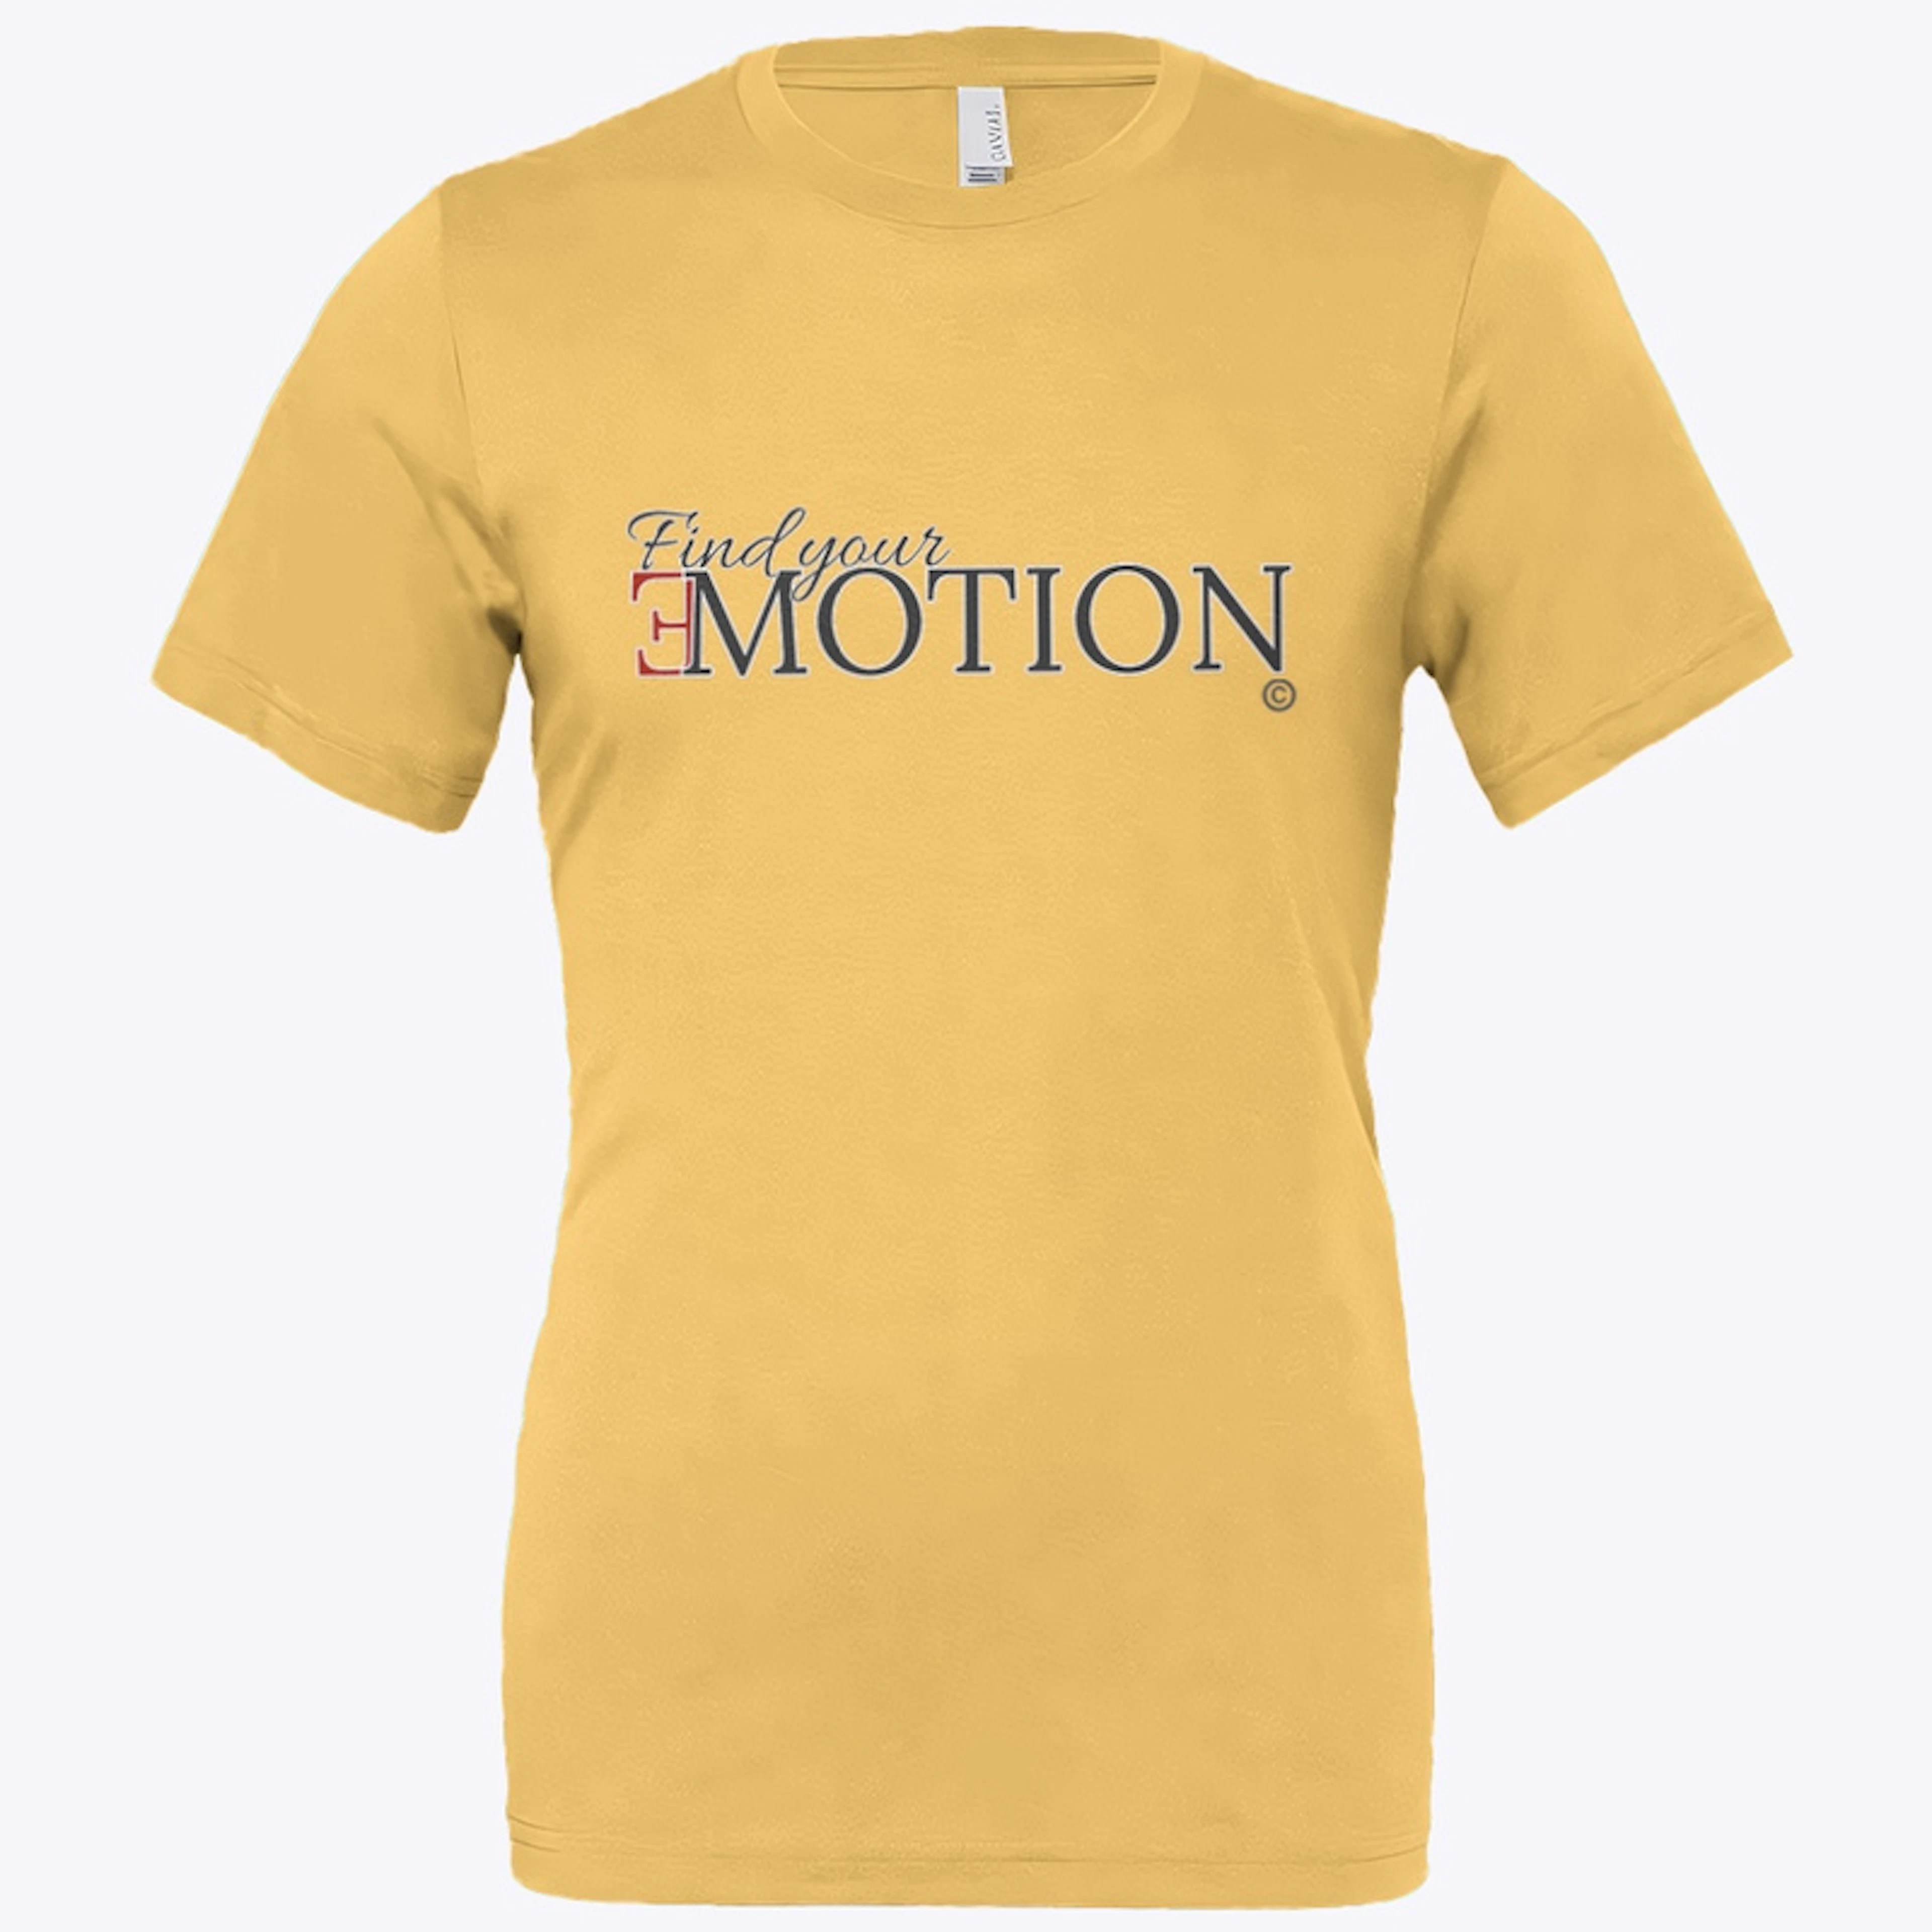 Find your motion mustard tee